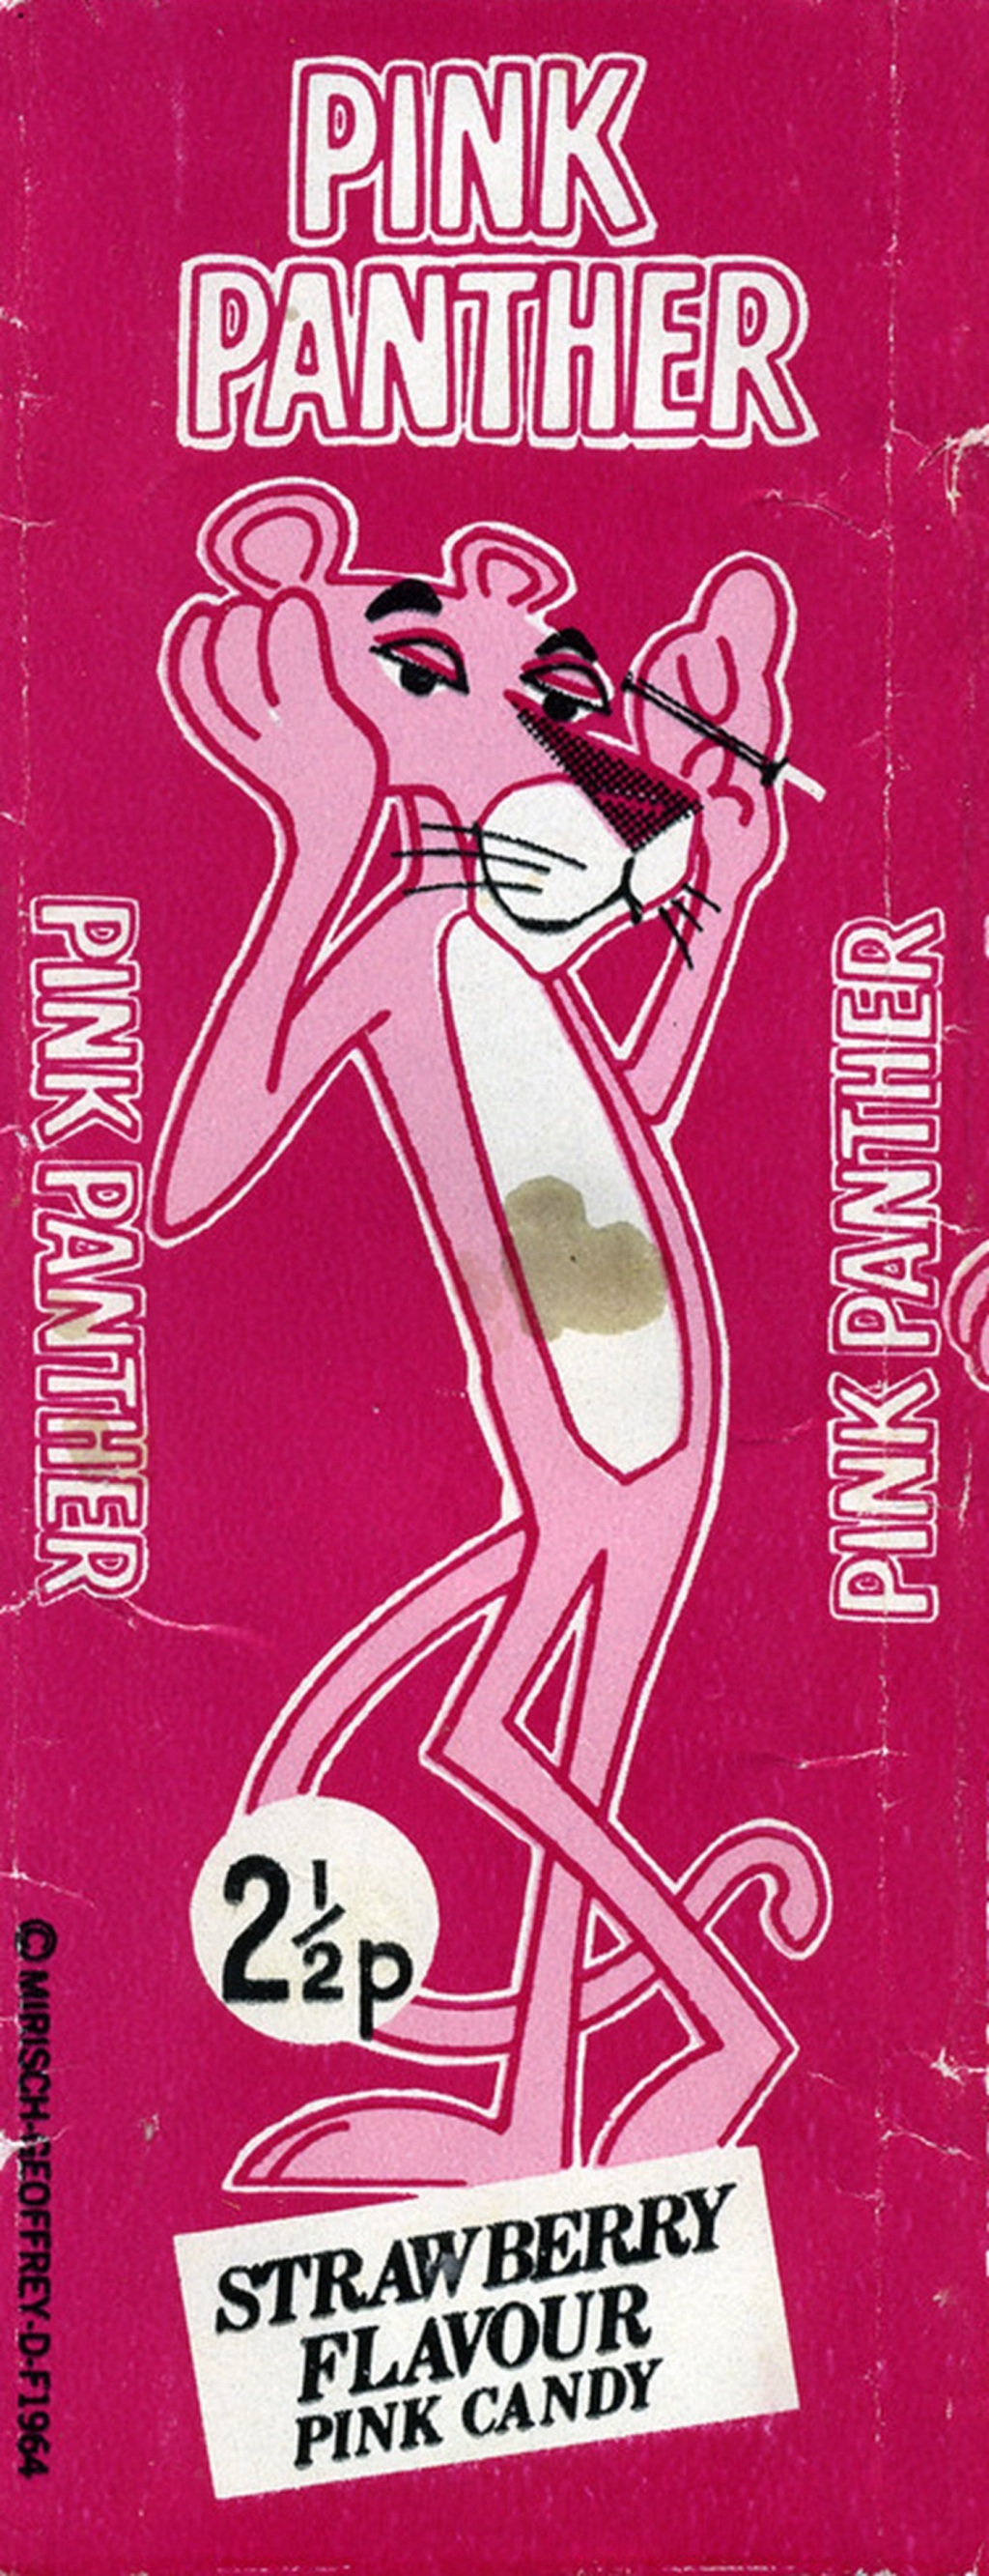 The Pink Panther Bar - listen to Ricardo Autobahn and Tim Worthington talking about it in Looks Unfamiliar.